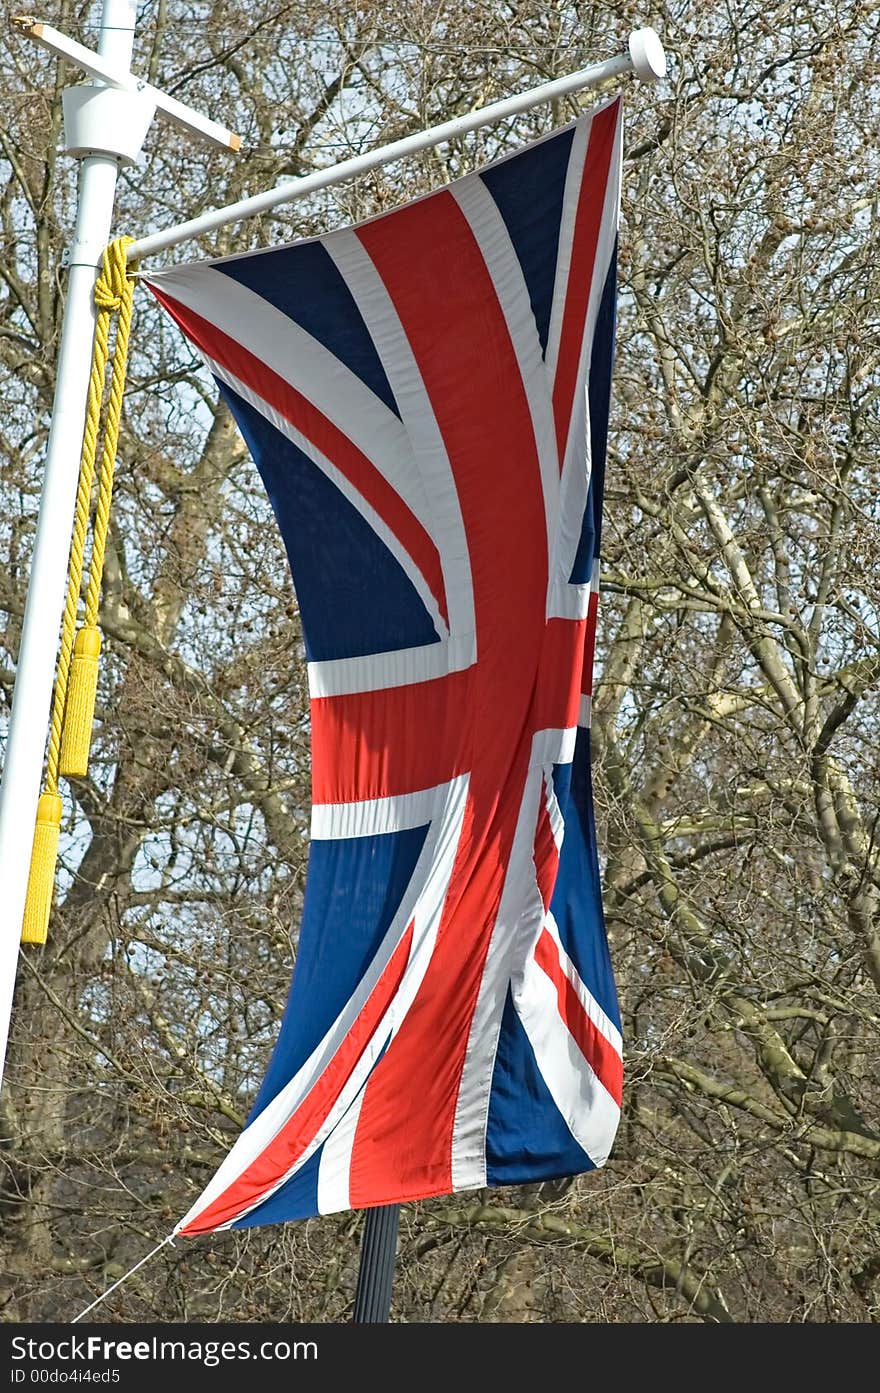 The Union Jack flapping in the breeze along the Mall, London, England.